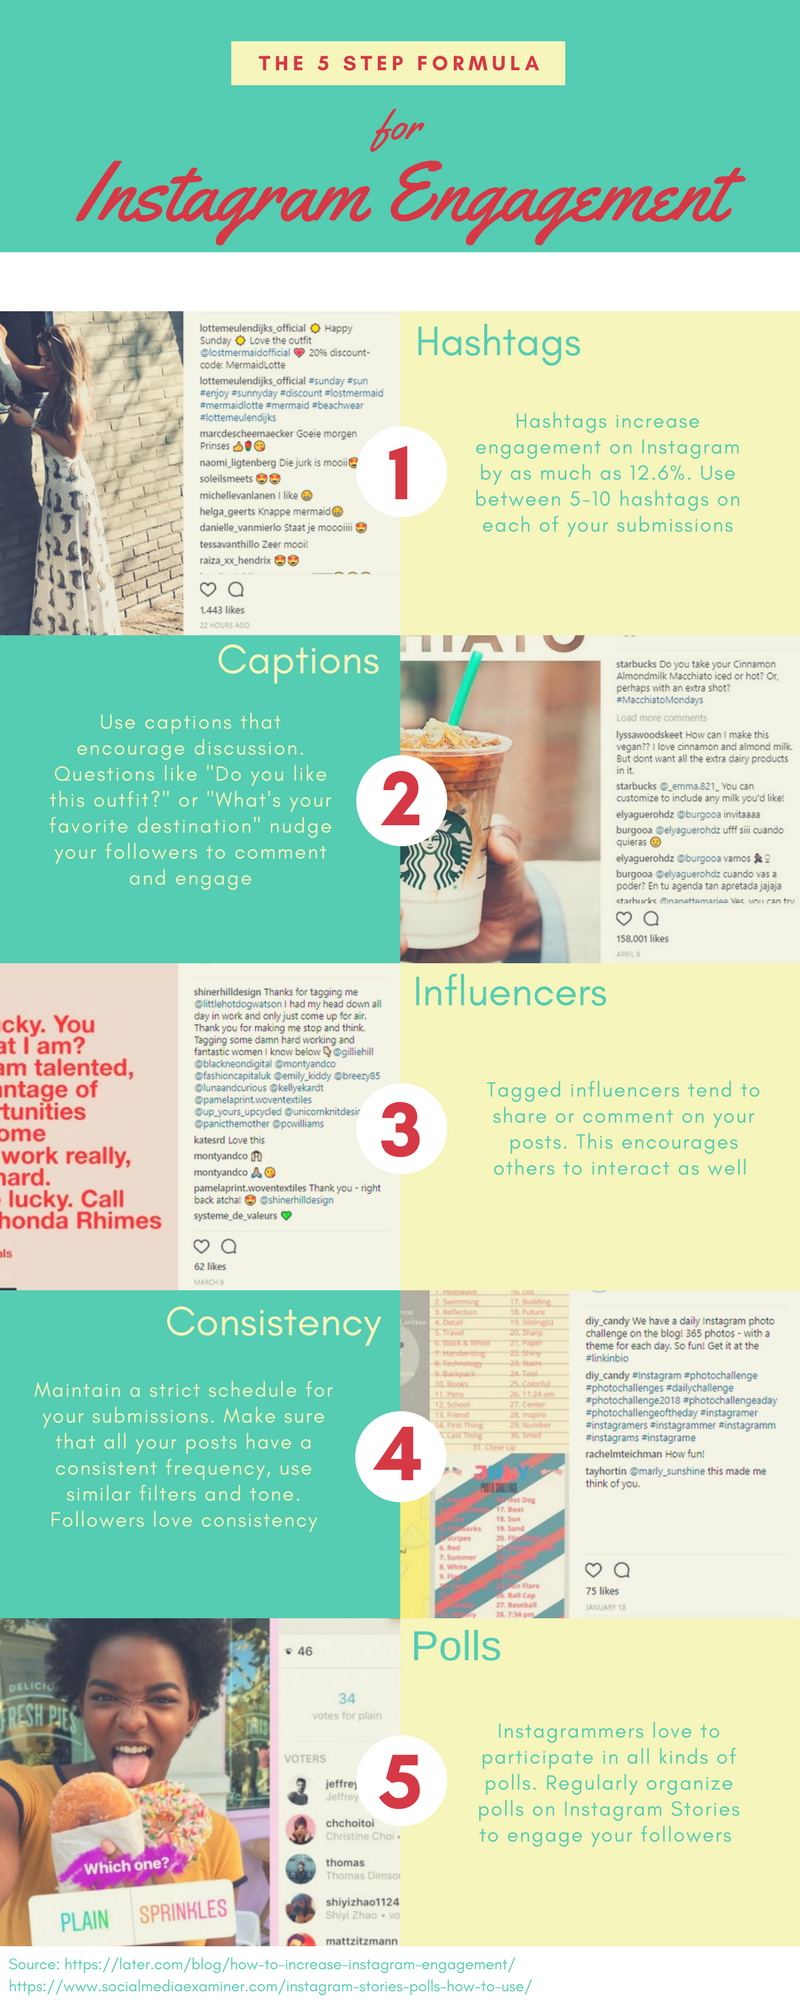 The Five Step Formula To Instagram Engagement